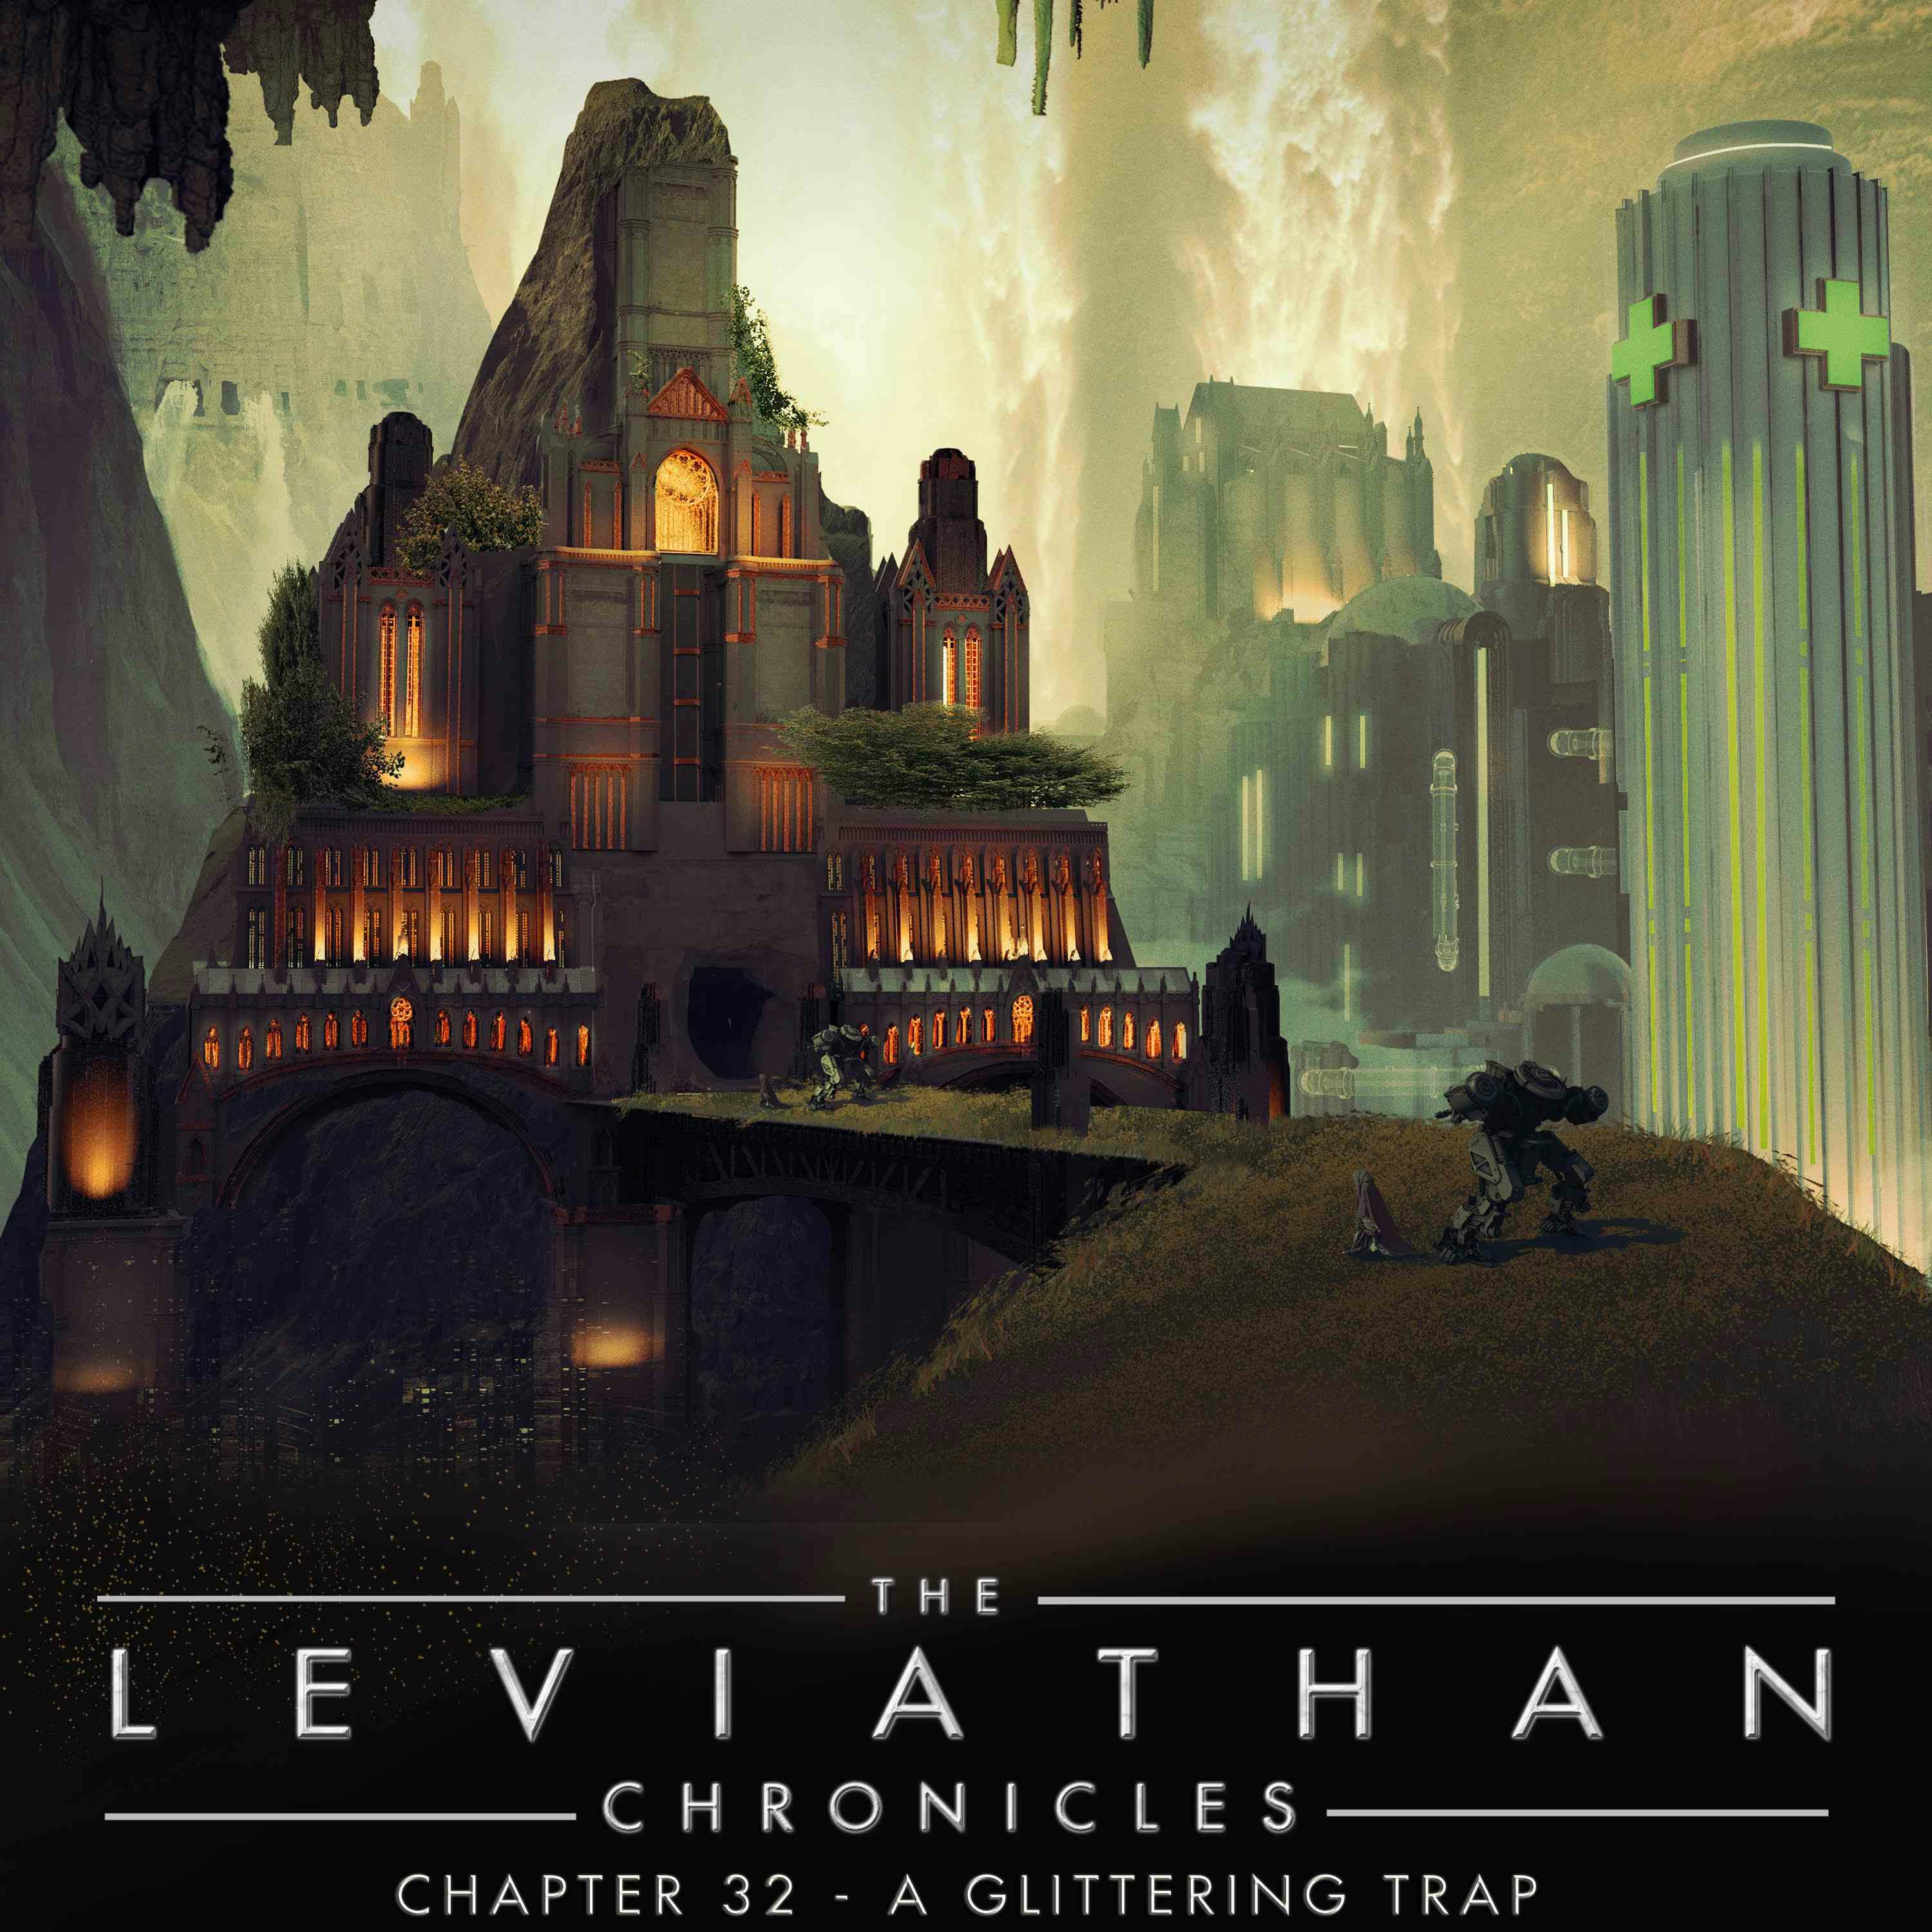 The Leviathan Chronicles | Chapter 32 - A Glittering Trap